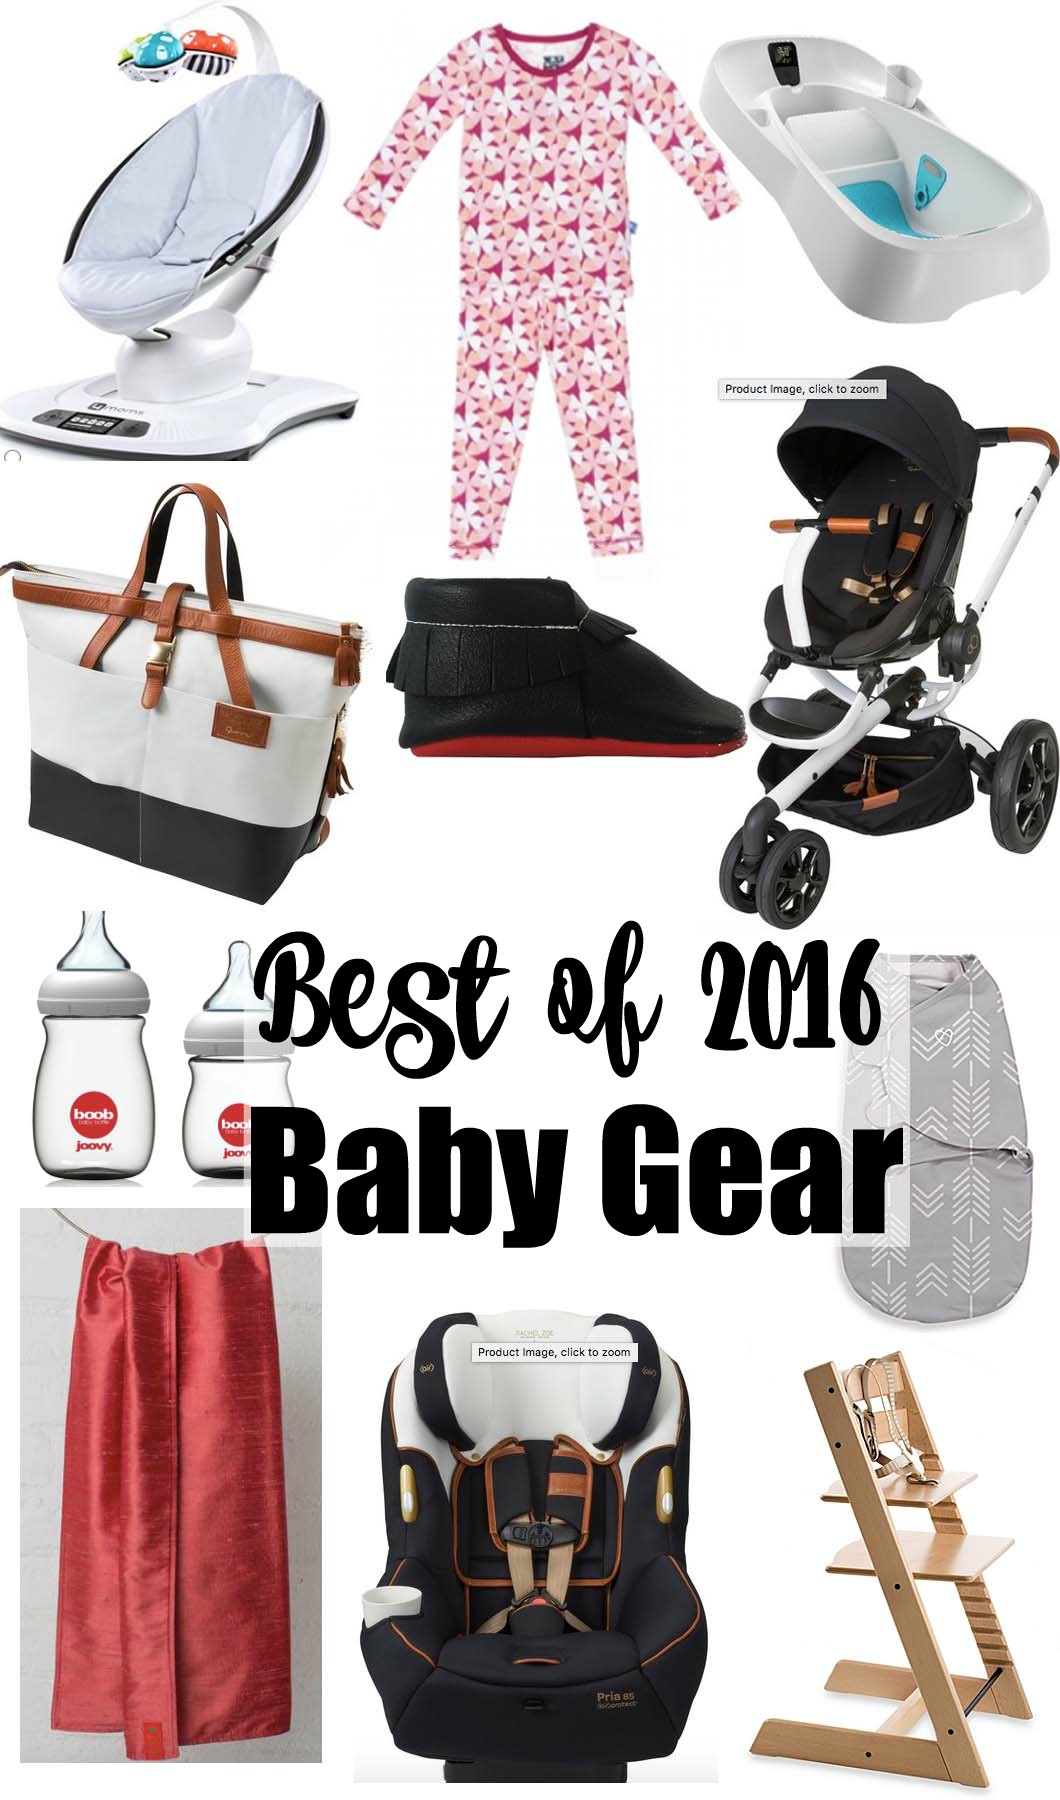 Best of 2016 Maxi Cosi Baby Gear by lifestyle blogger Jessica of Happily Hughes